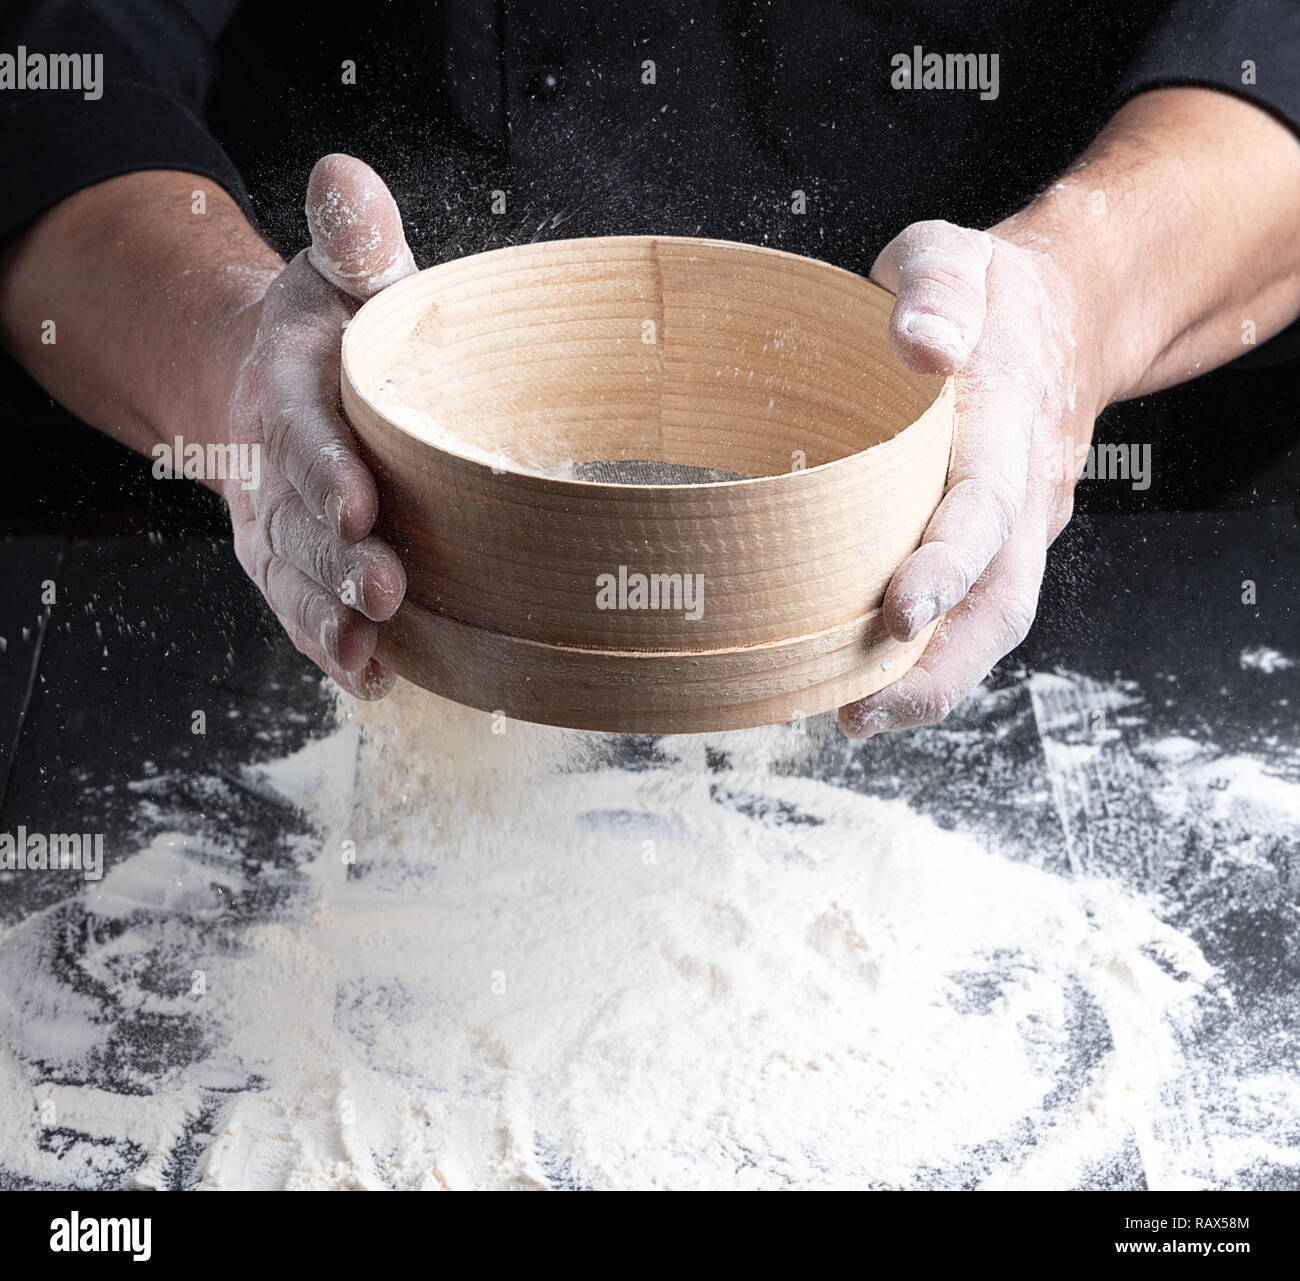 https://c8.alamy.com/comp/RAX58M/chef-in-a-black-uniform-holds-in-his-hand-a-round-wooden-sieve-and-sift-white-wheat-flour-RAX58M.jpg